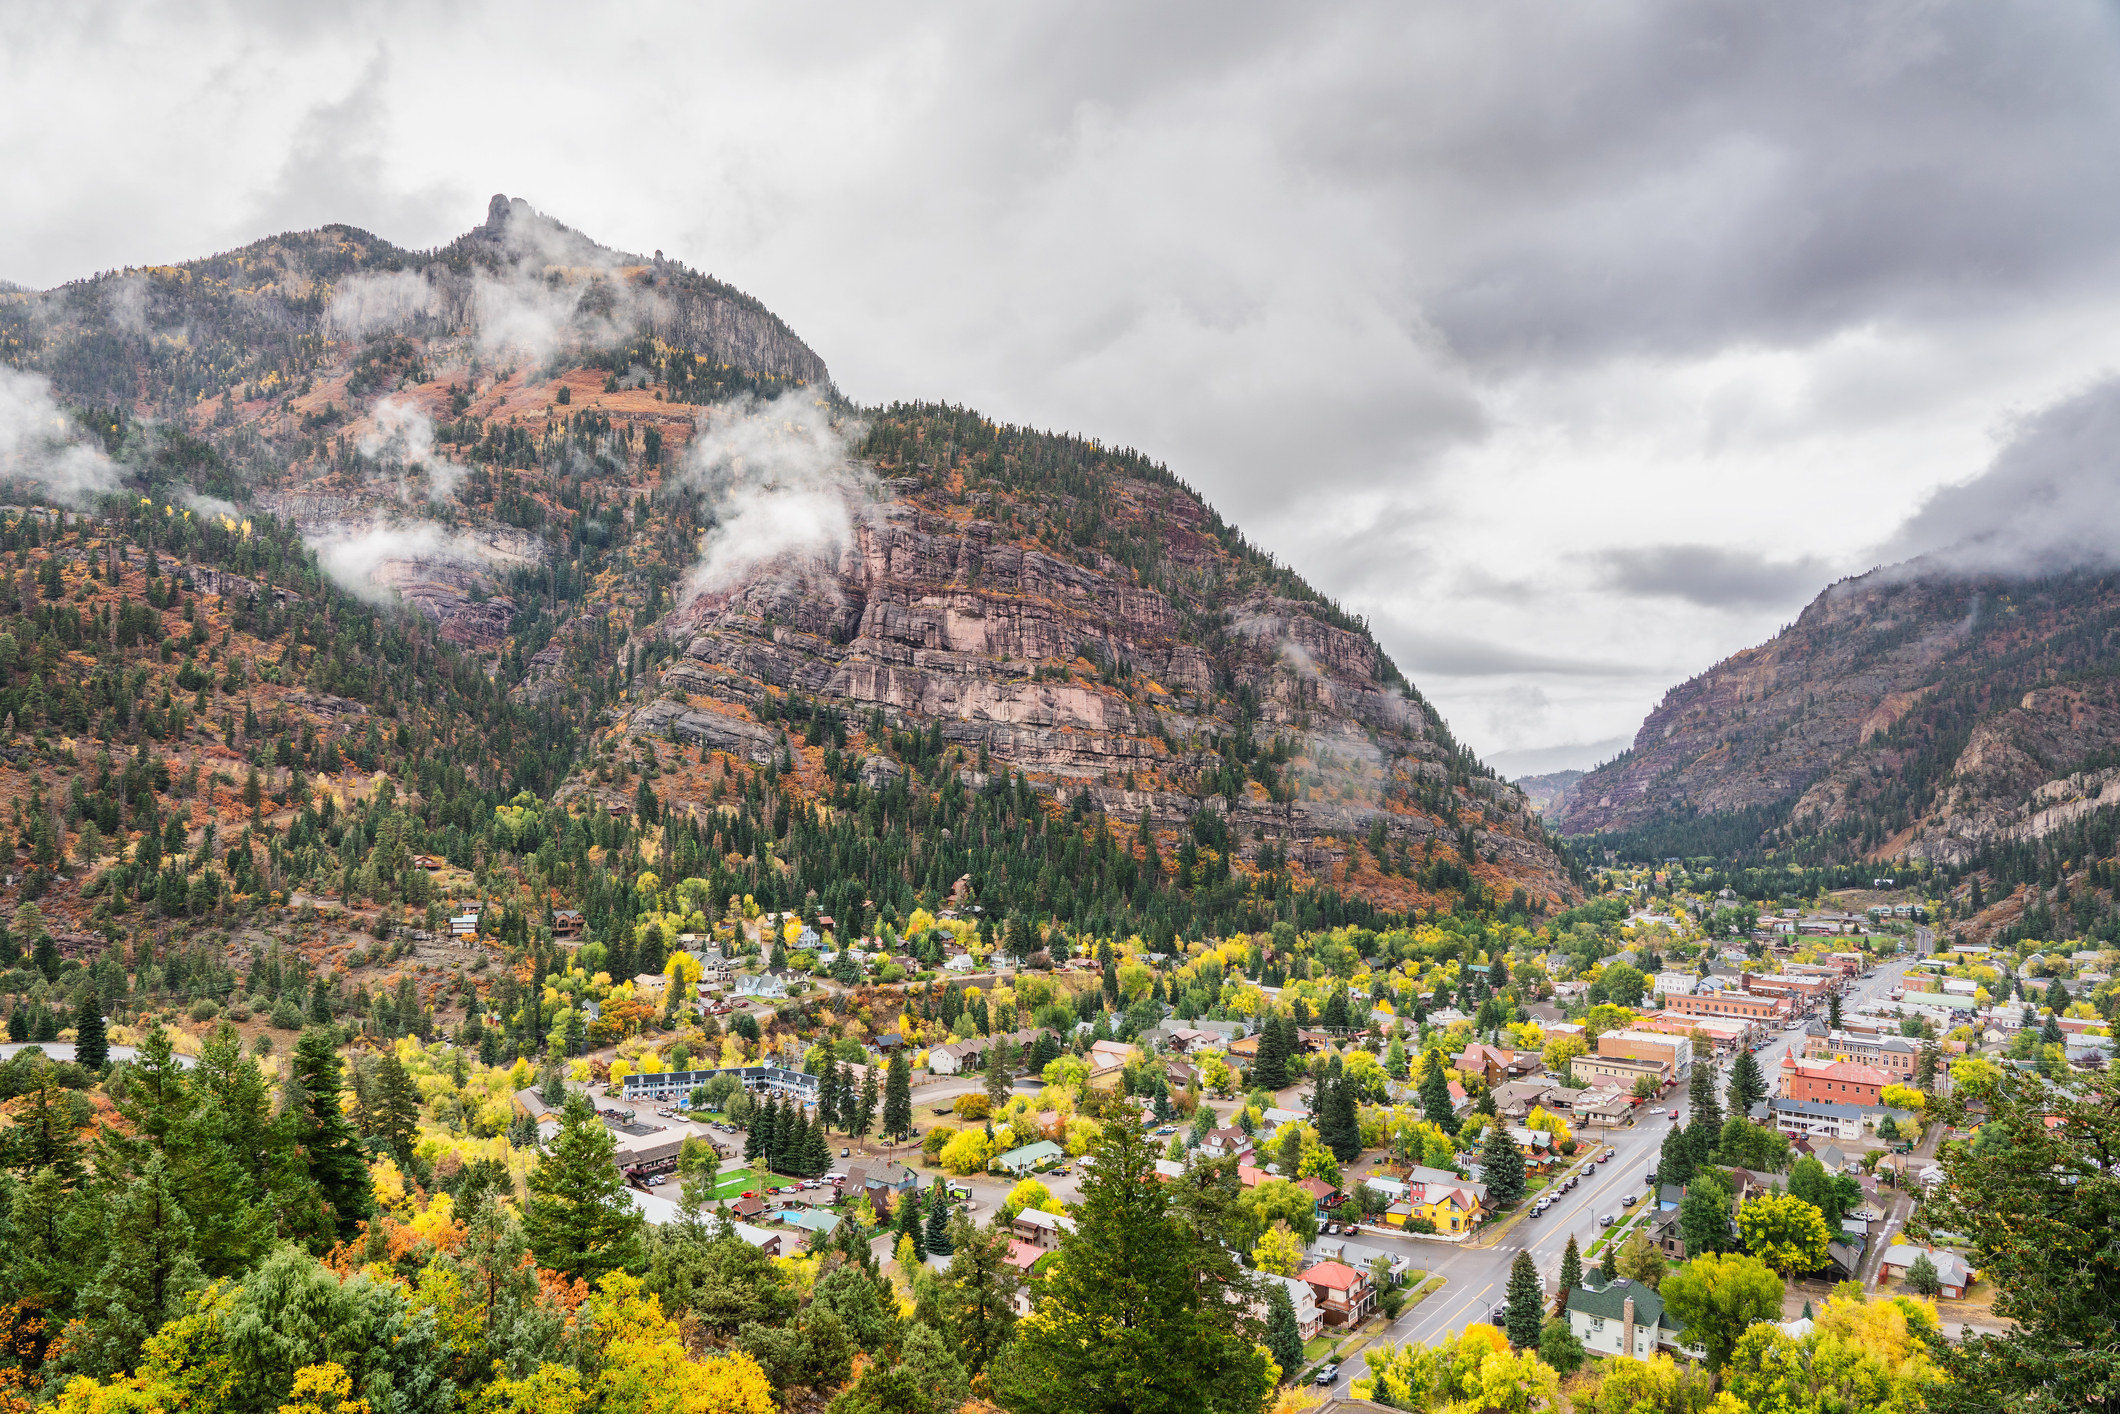 Overhead view of a small town nestled between mountains on a cloudy, fall day